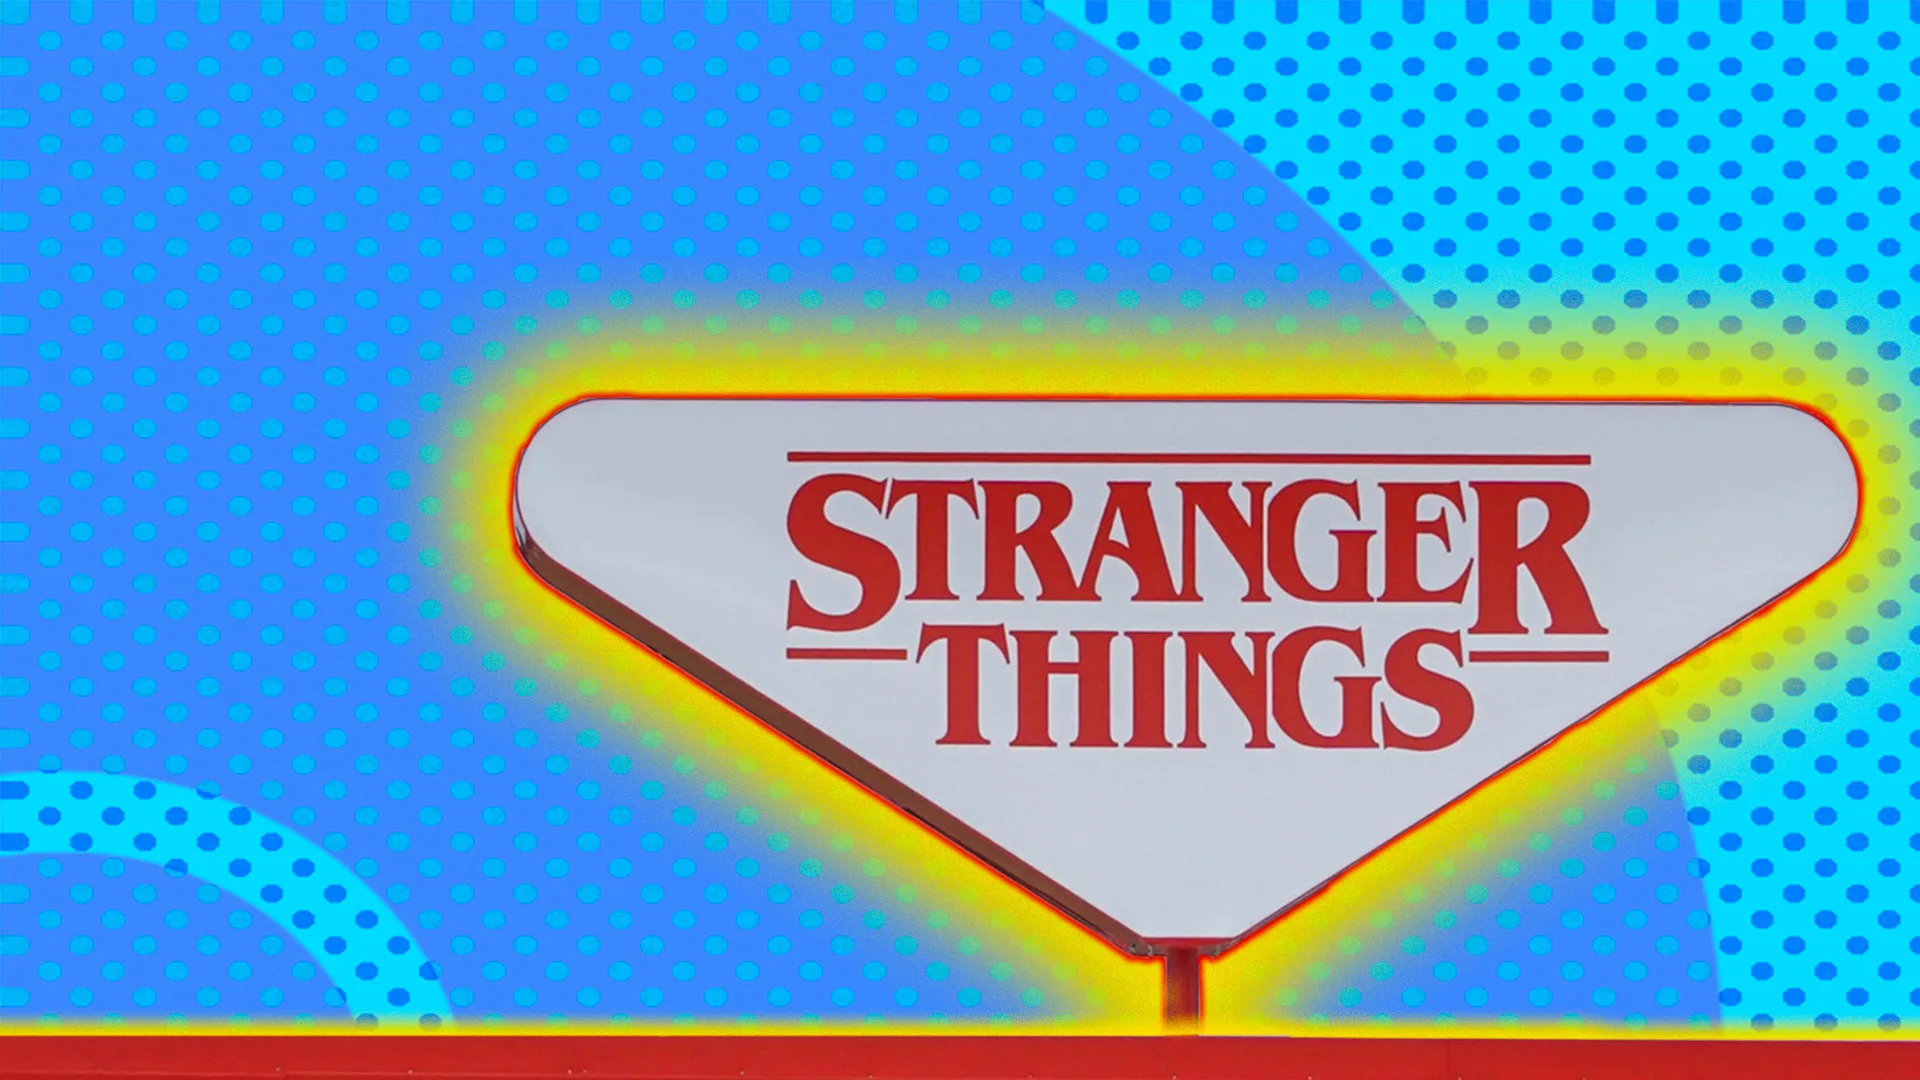 Stranger things sign on top of a building in graphic house style